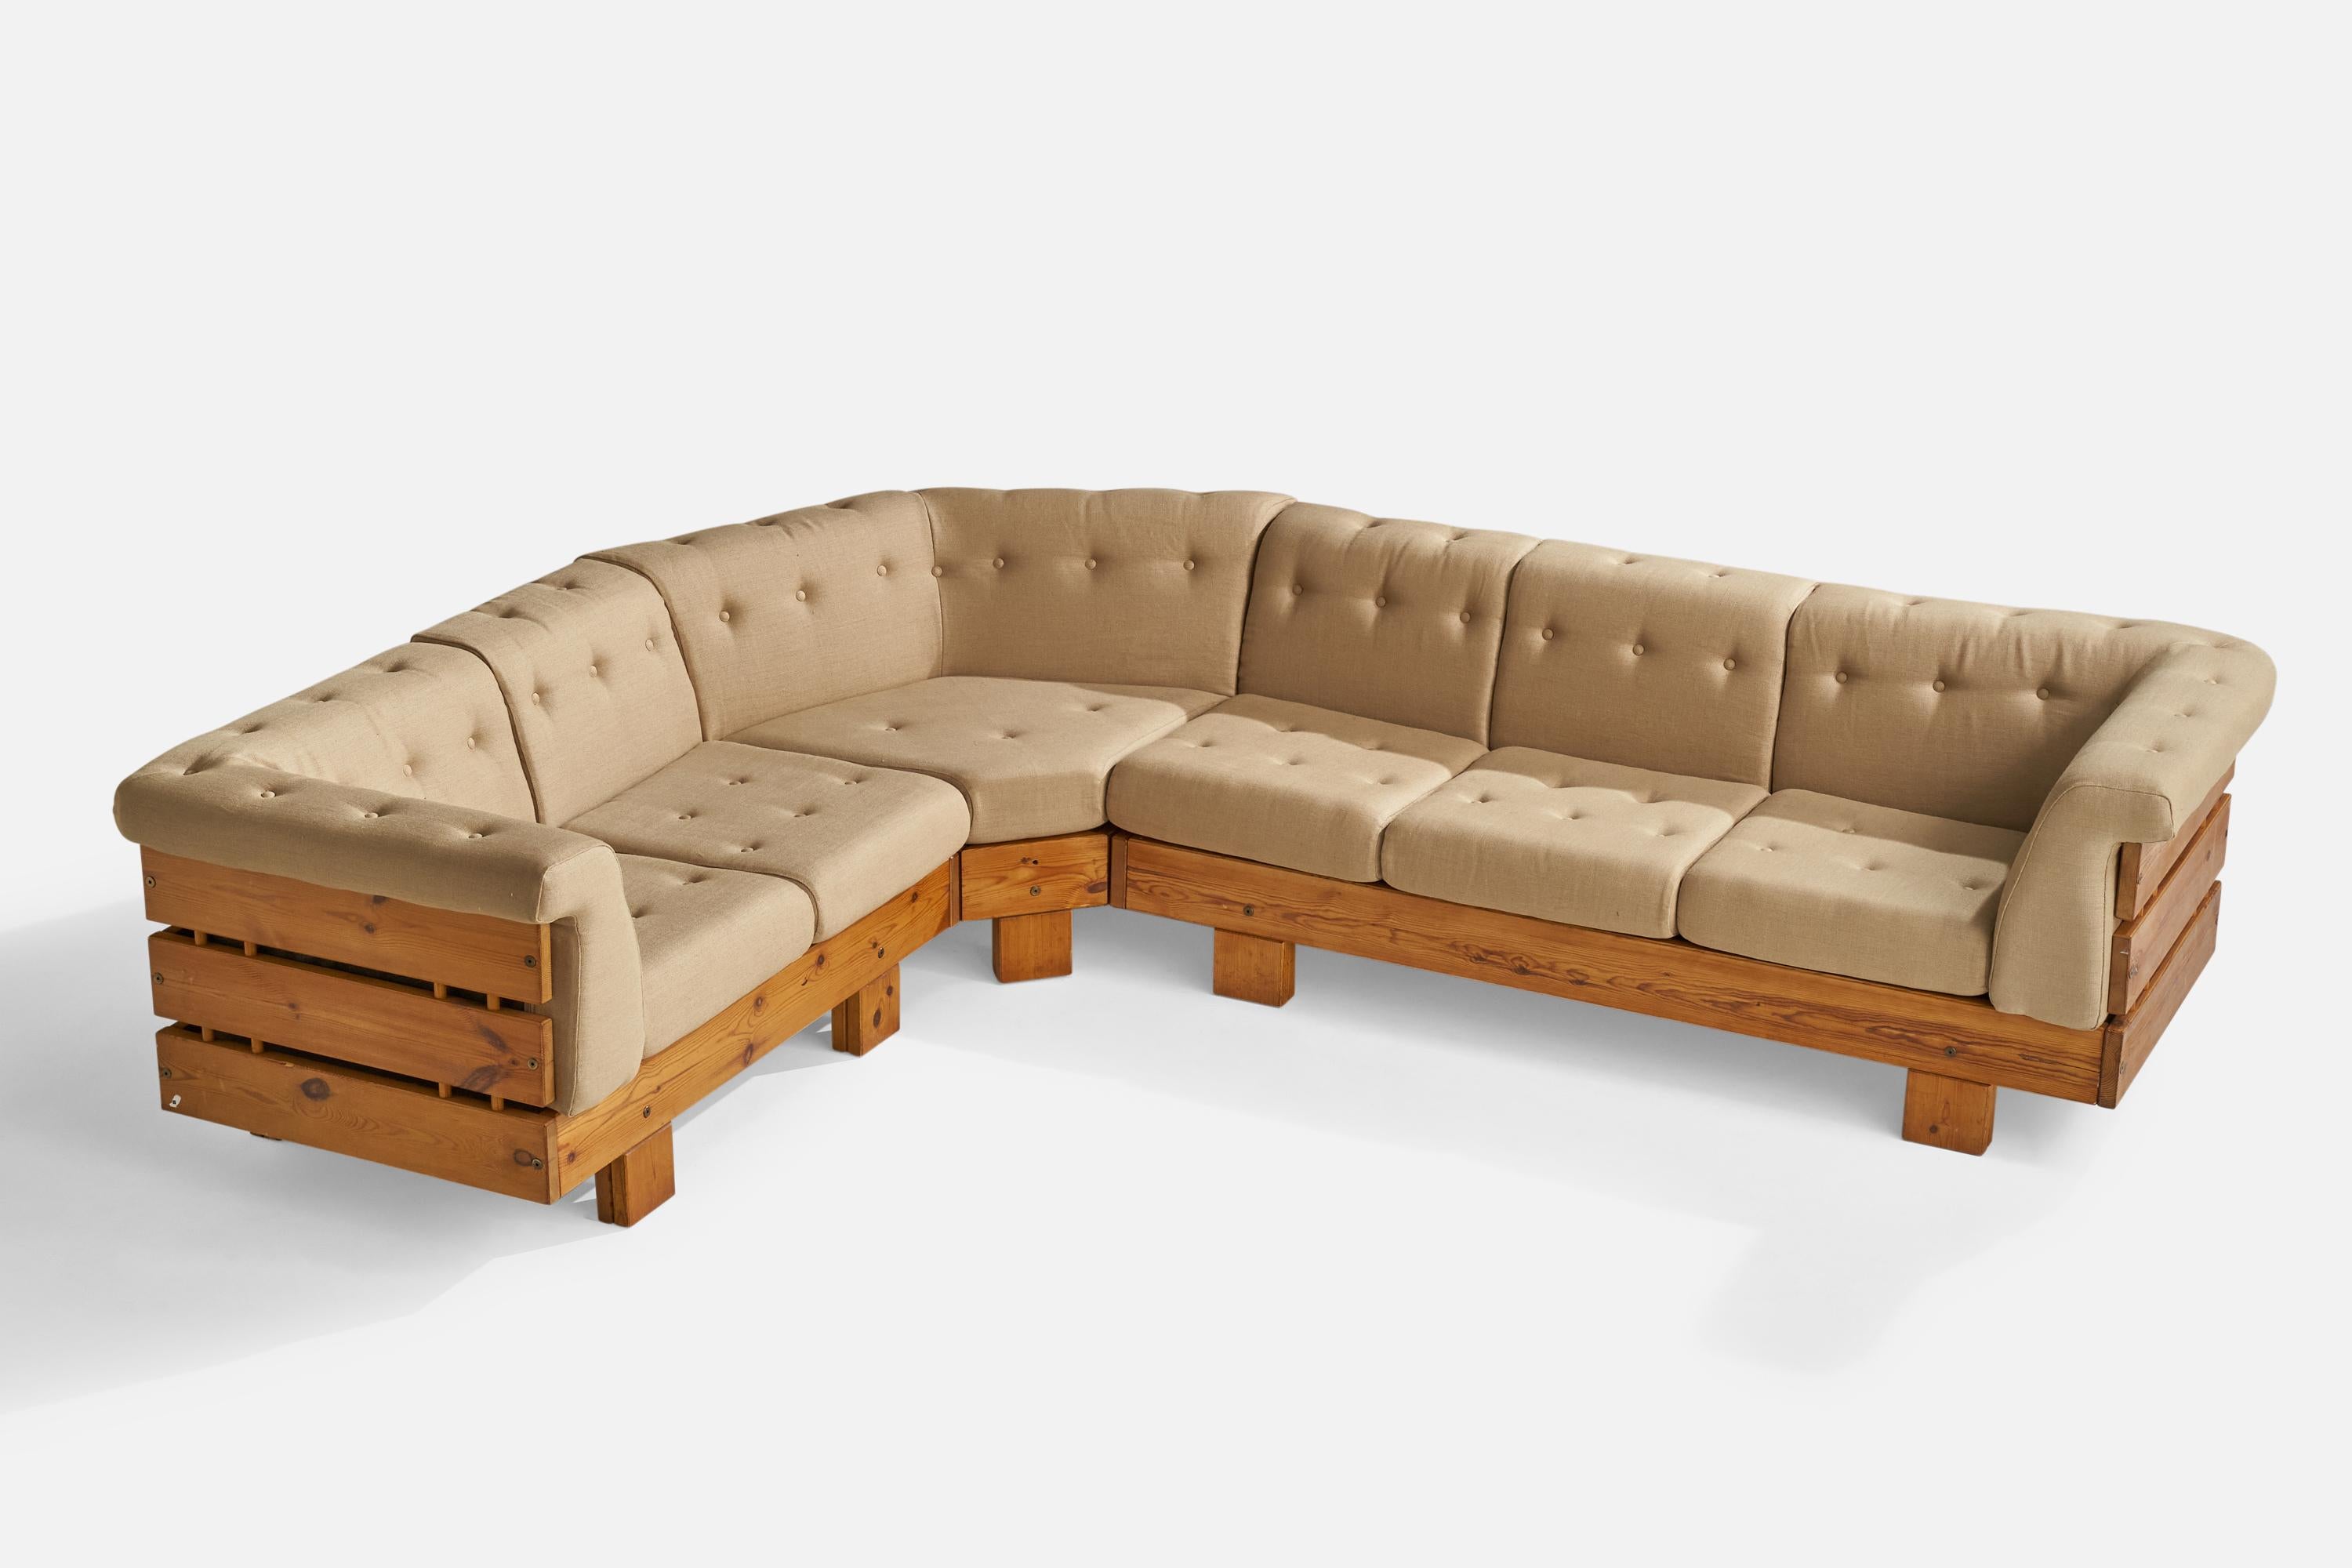 A large pine and beige fabric sectional sofa designed by Sven Larsson and produced by Sven Larsson Möbelshop, Sweden, 1970s.

Seat height 16.5”

